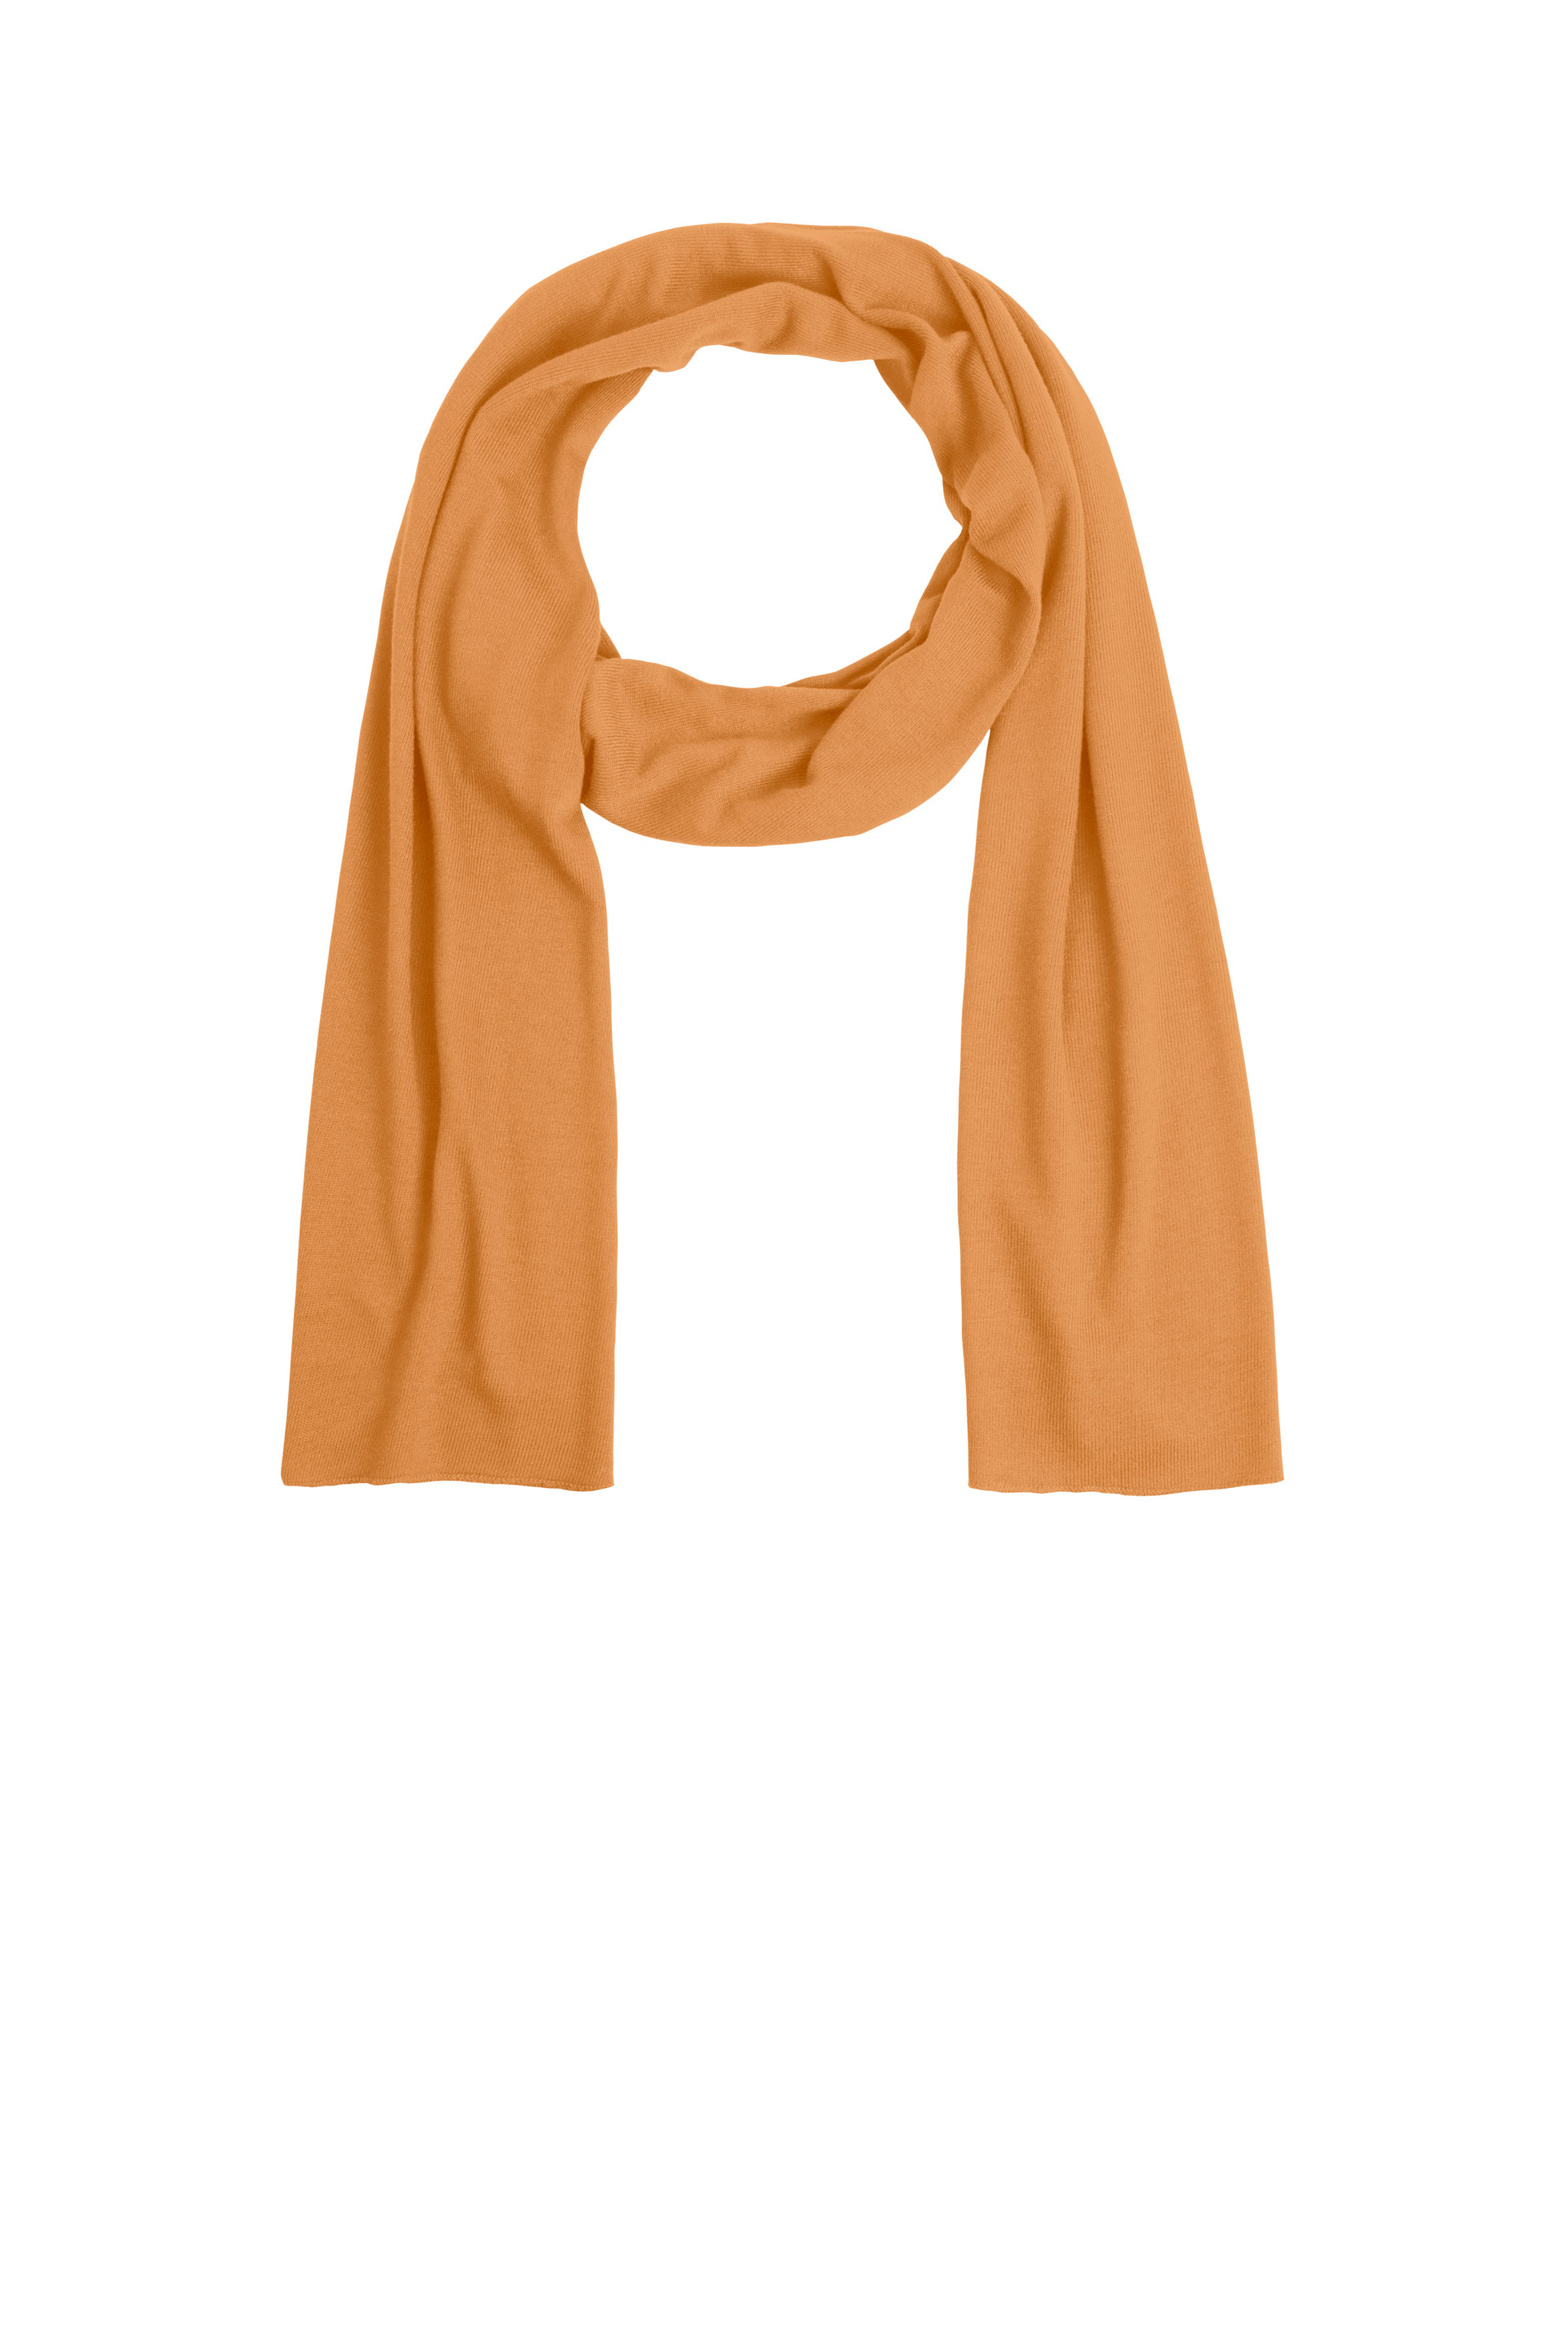 33028_willow_scarf_amber.jpg